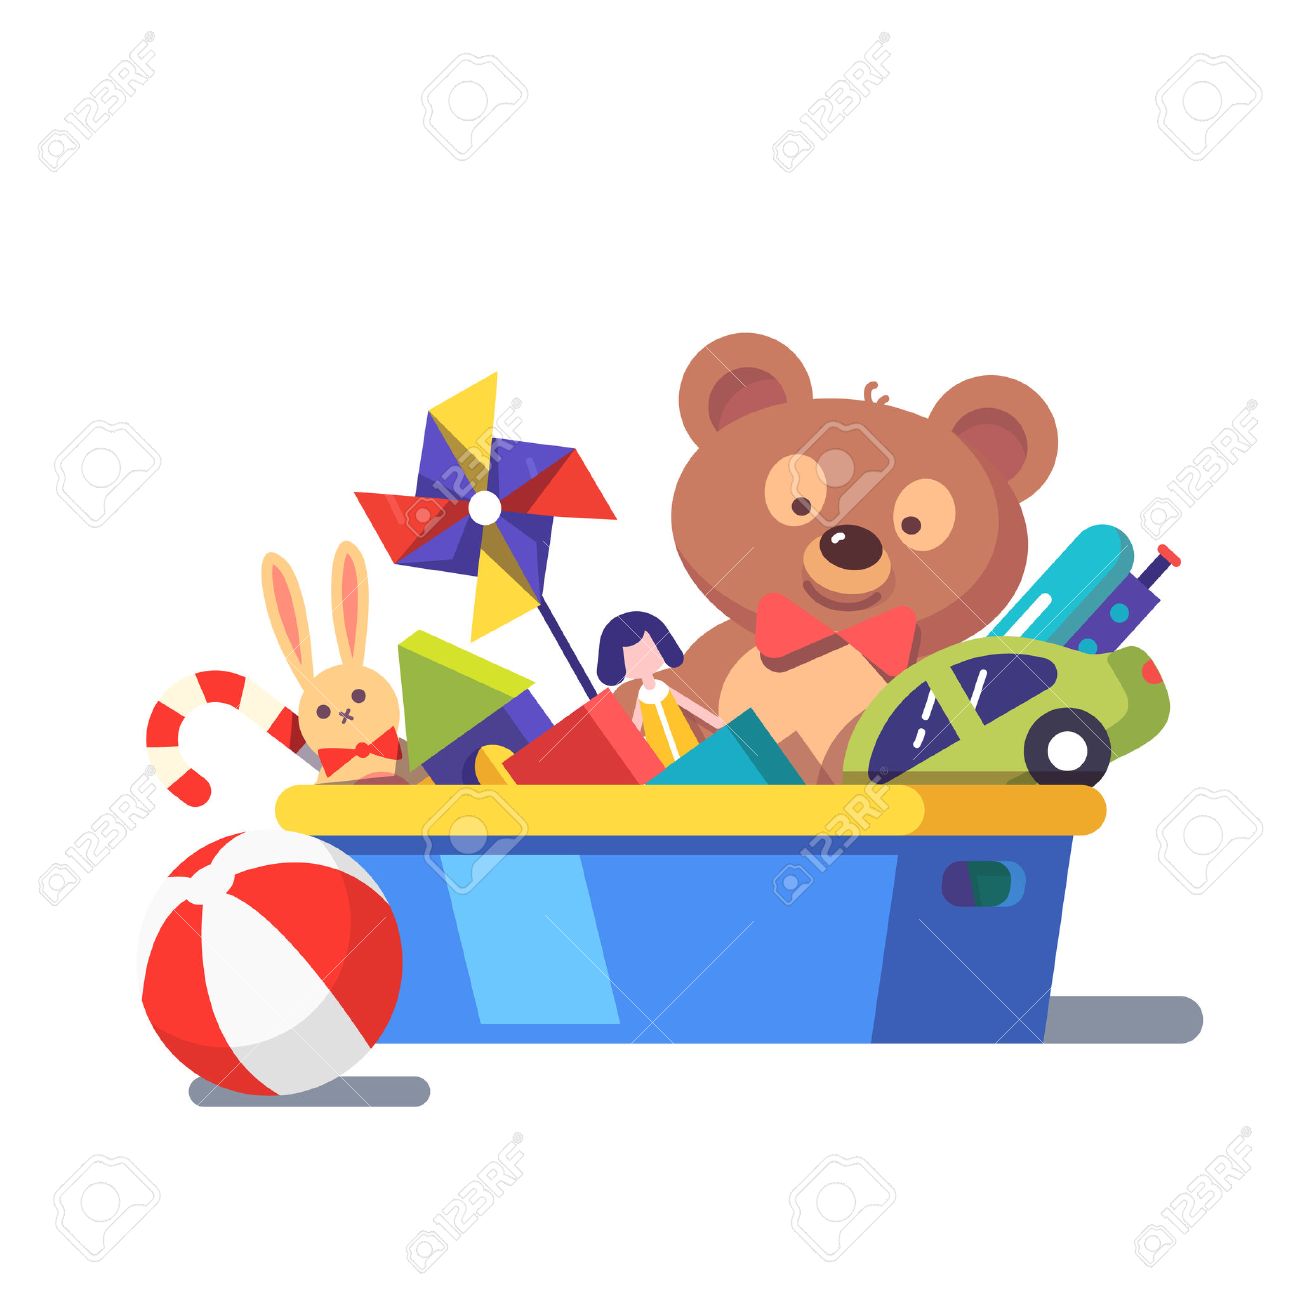 Box of toys clipart 6 » Clipart Station.